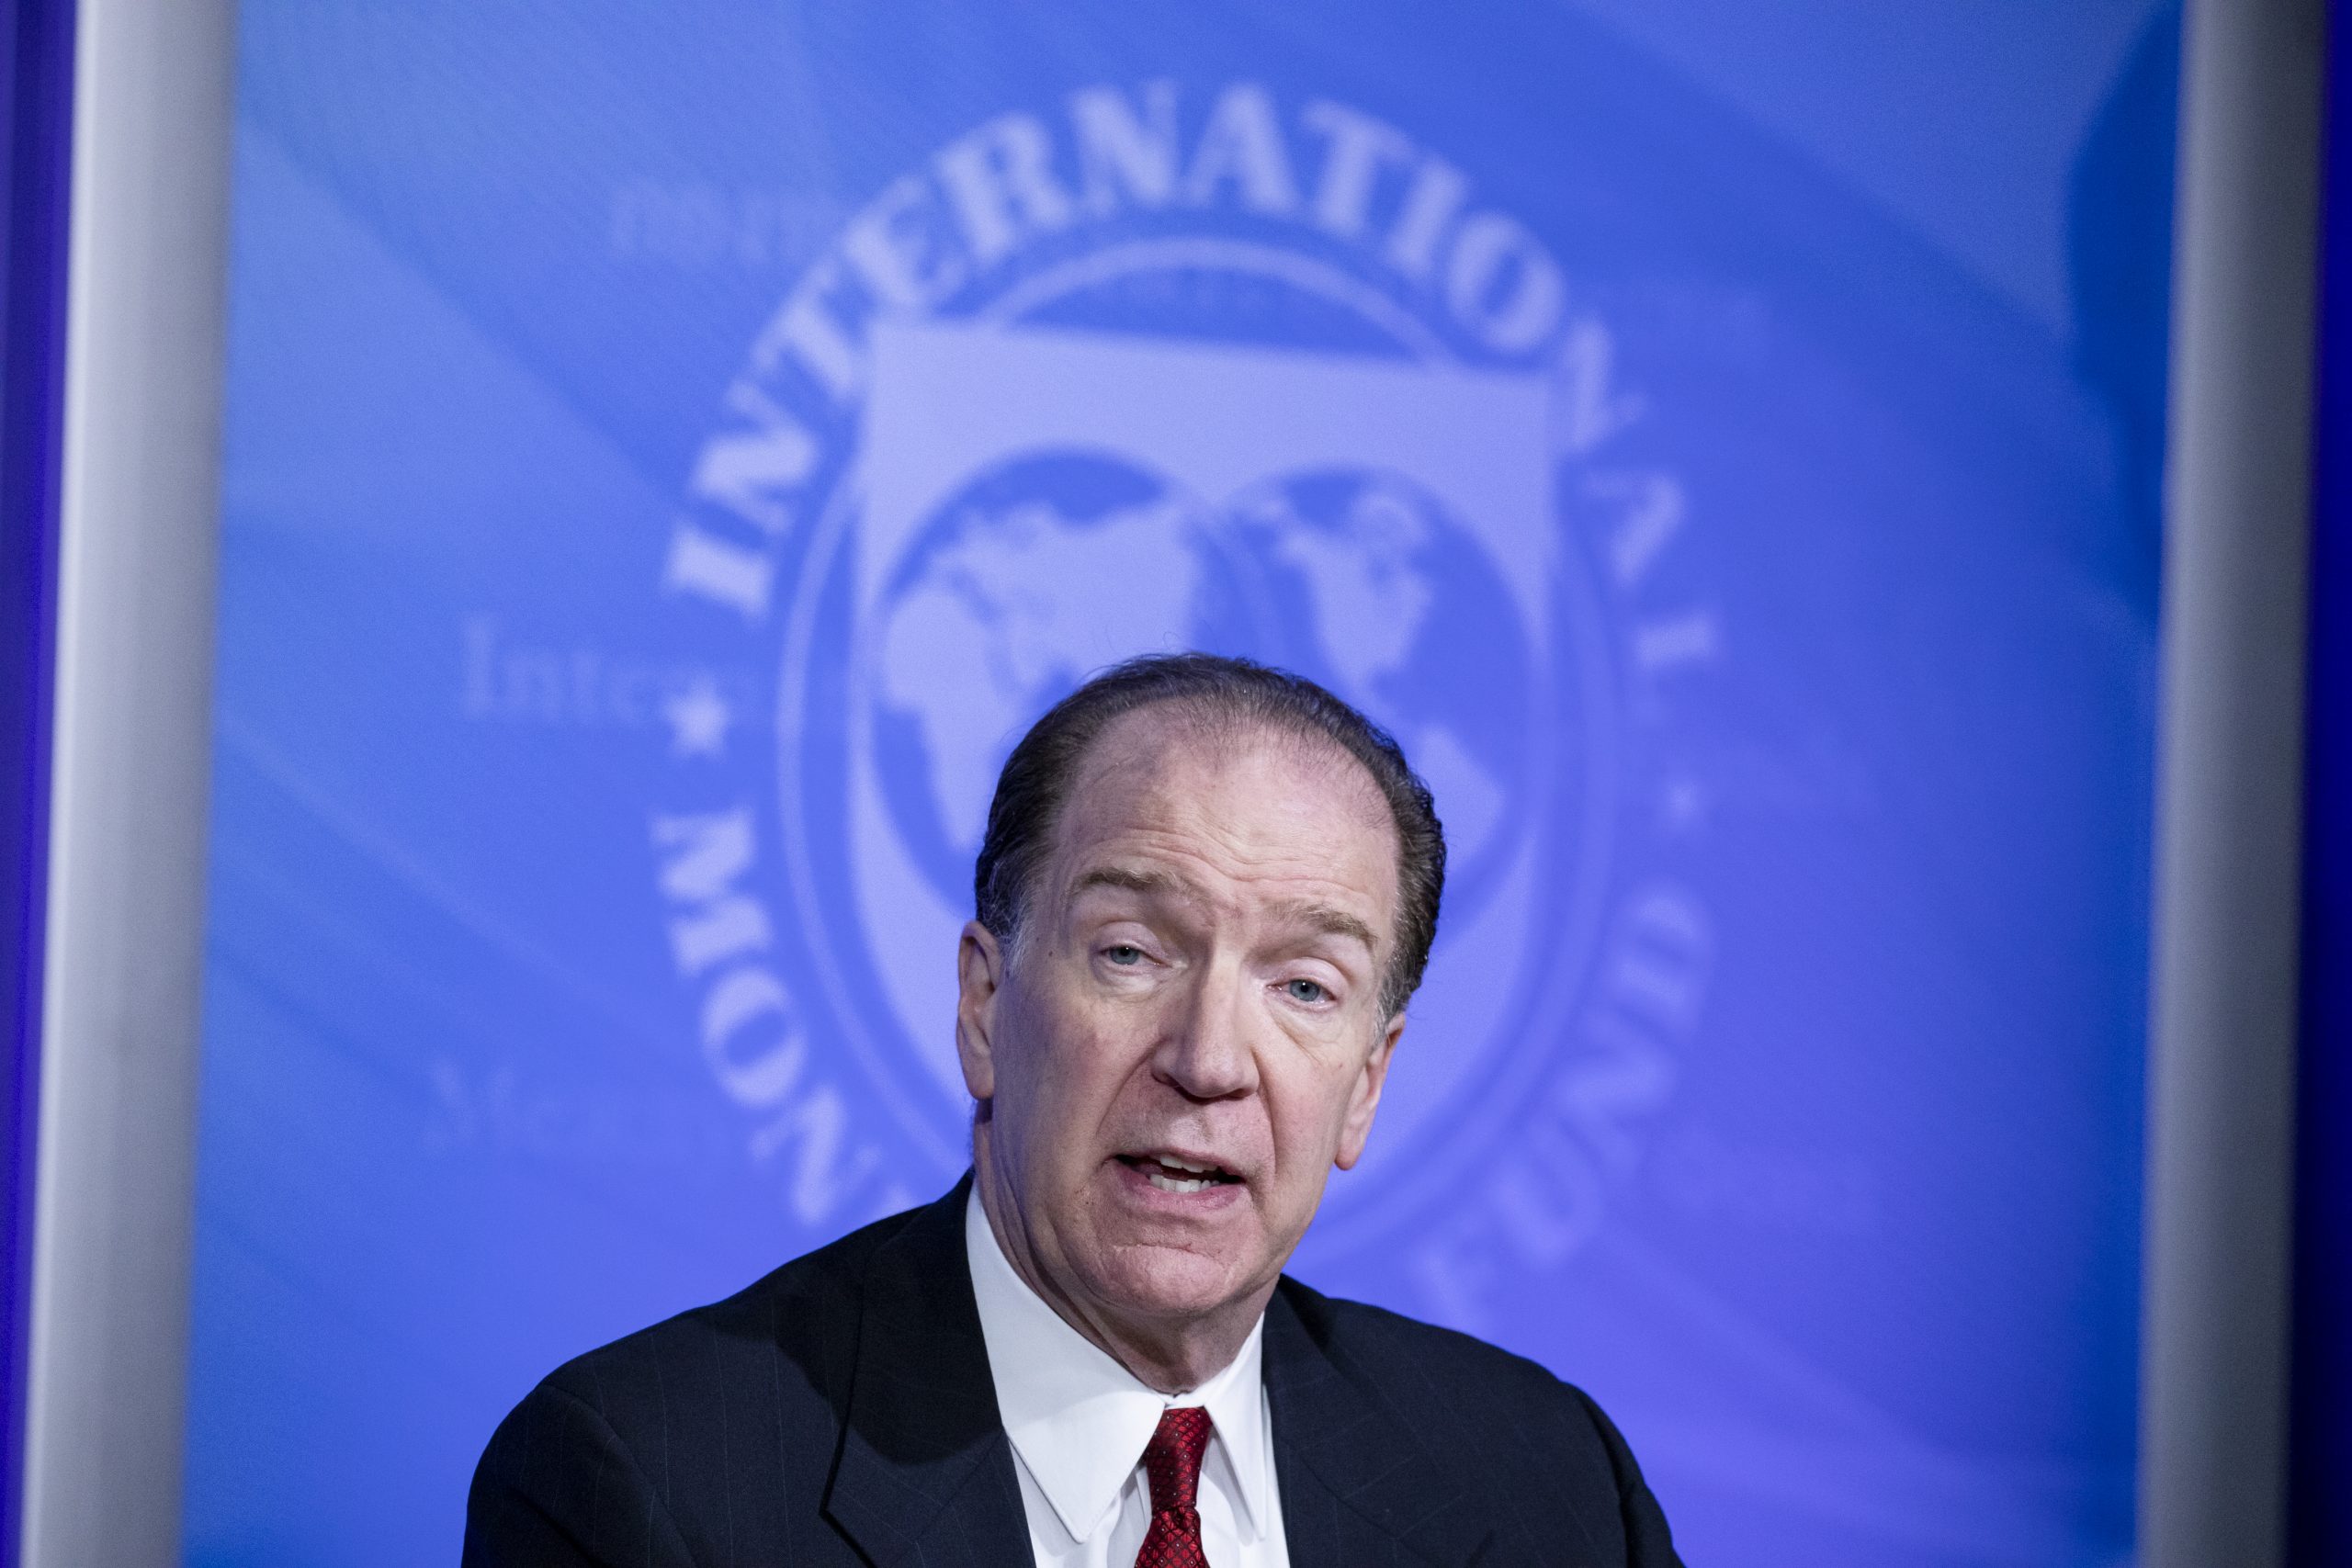 Malpass survives climate gaffe, but the World Bank’s fossil fuel policy may not